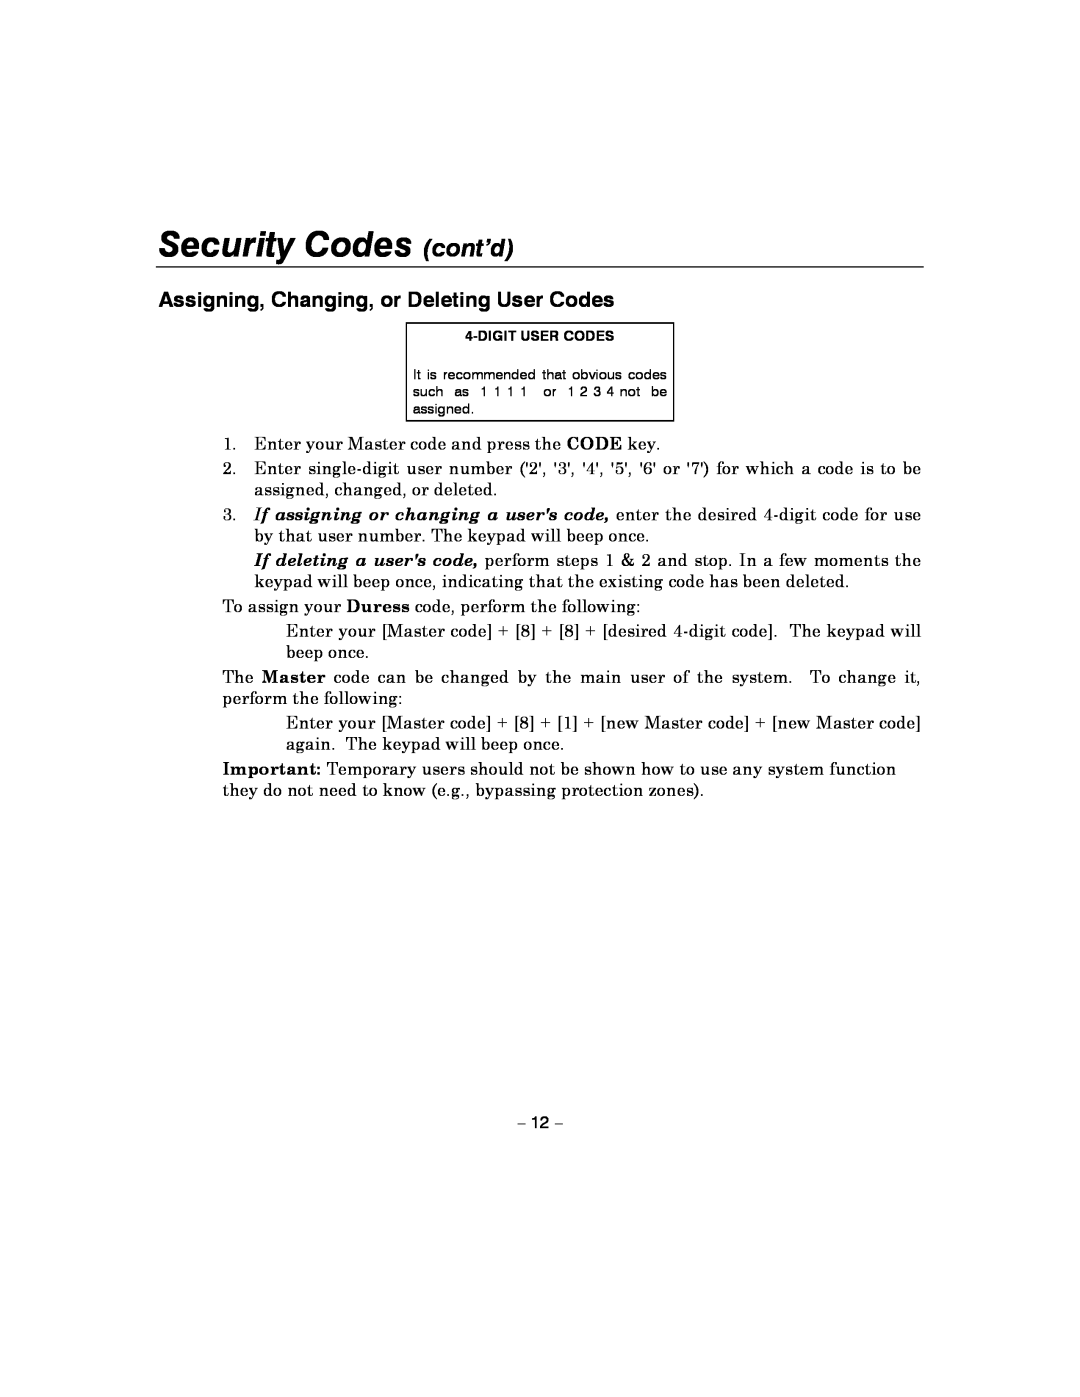 Honeywell 4110XM manual Security Codes cont’d, Assigning, Changing, or Deleting User Codes 